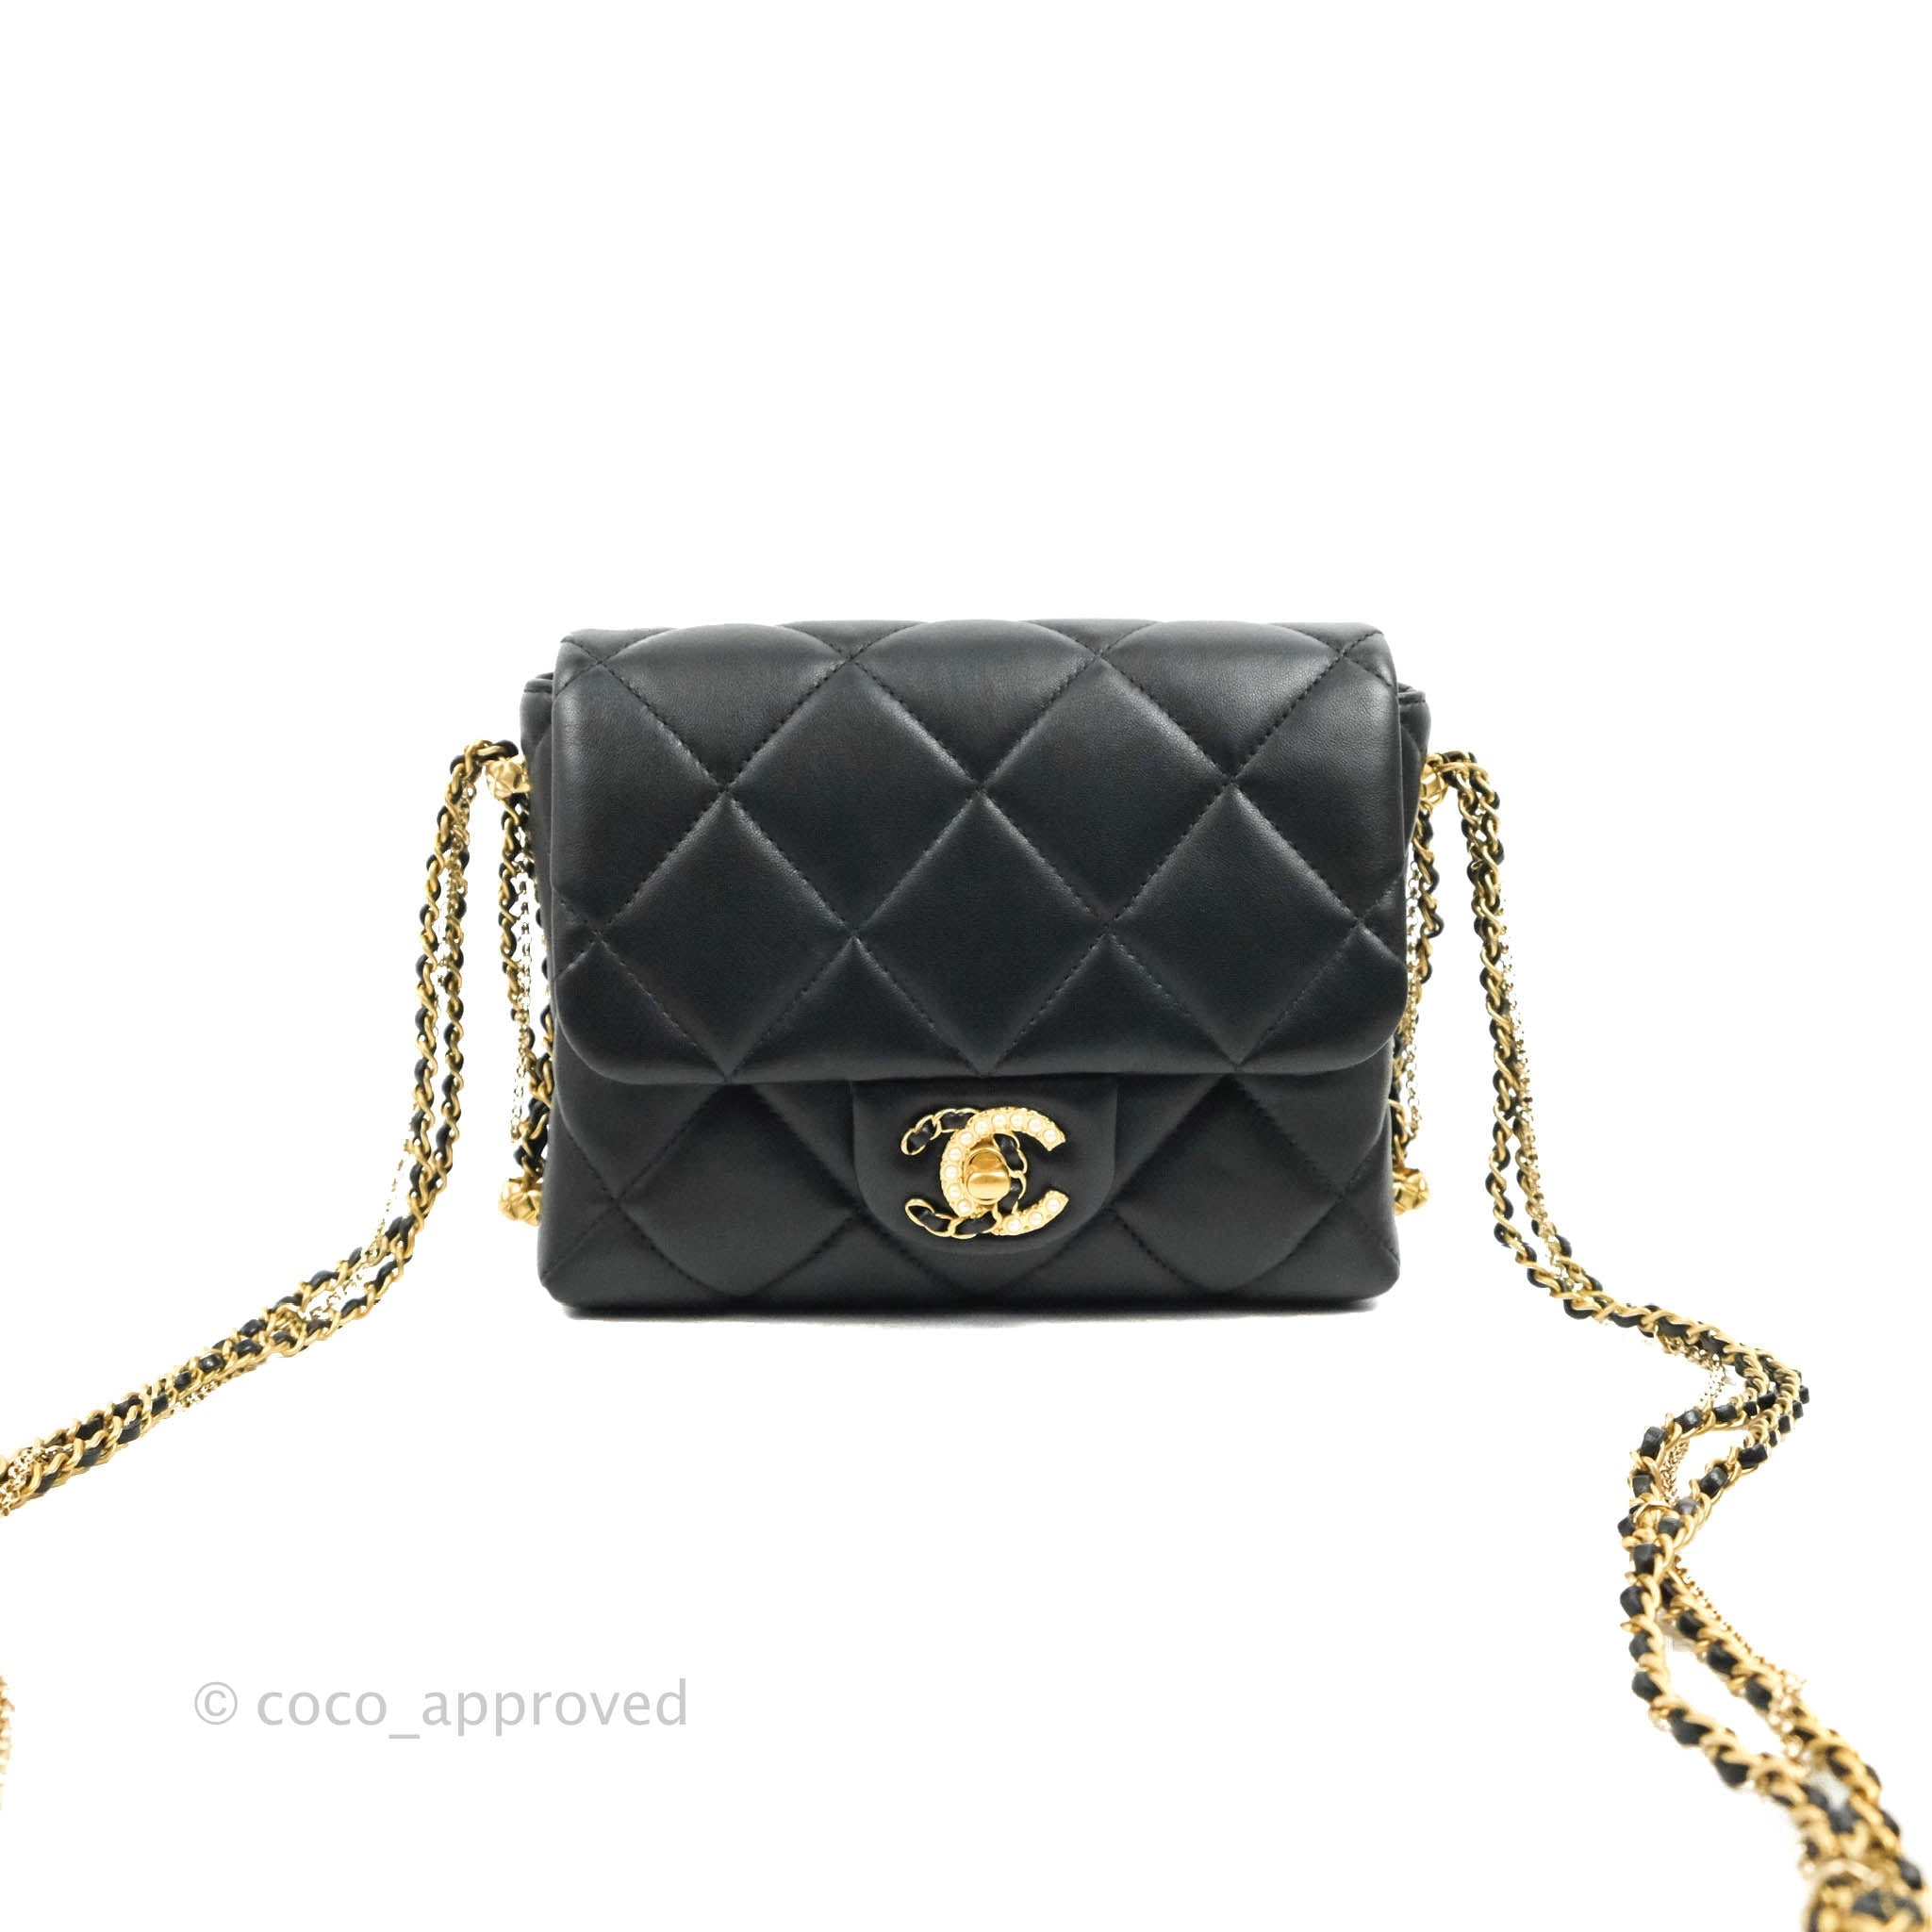 chanel bag with ball chain